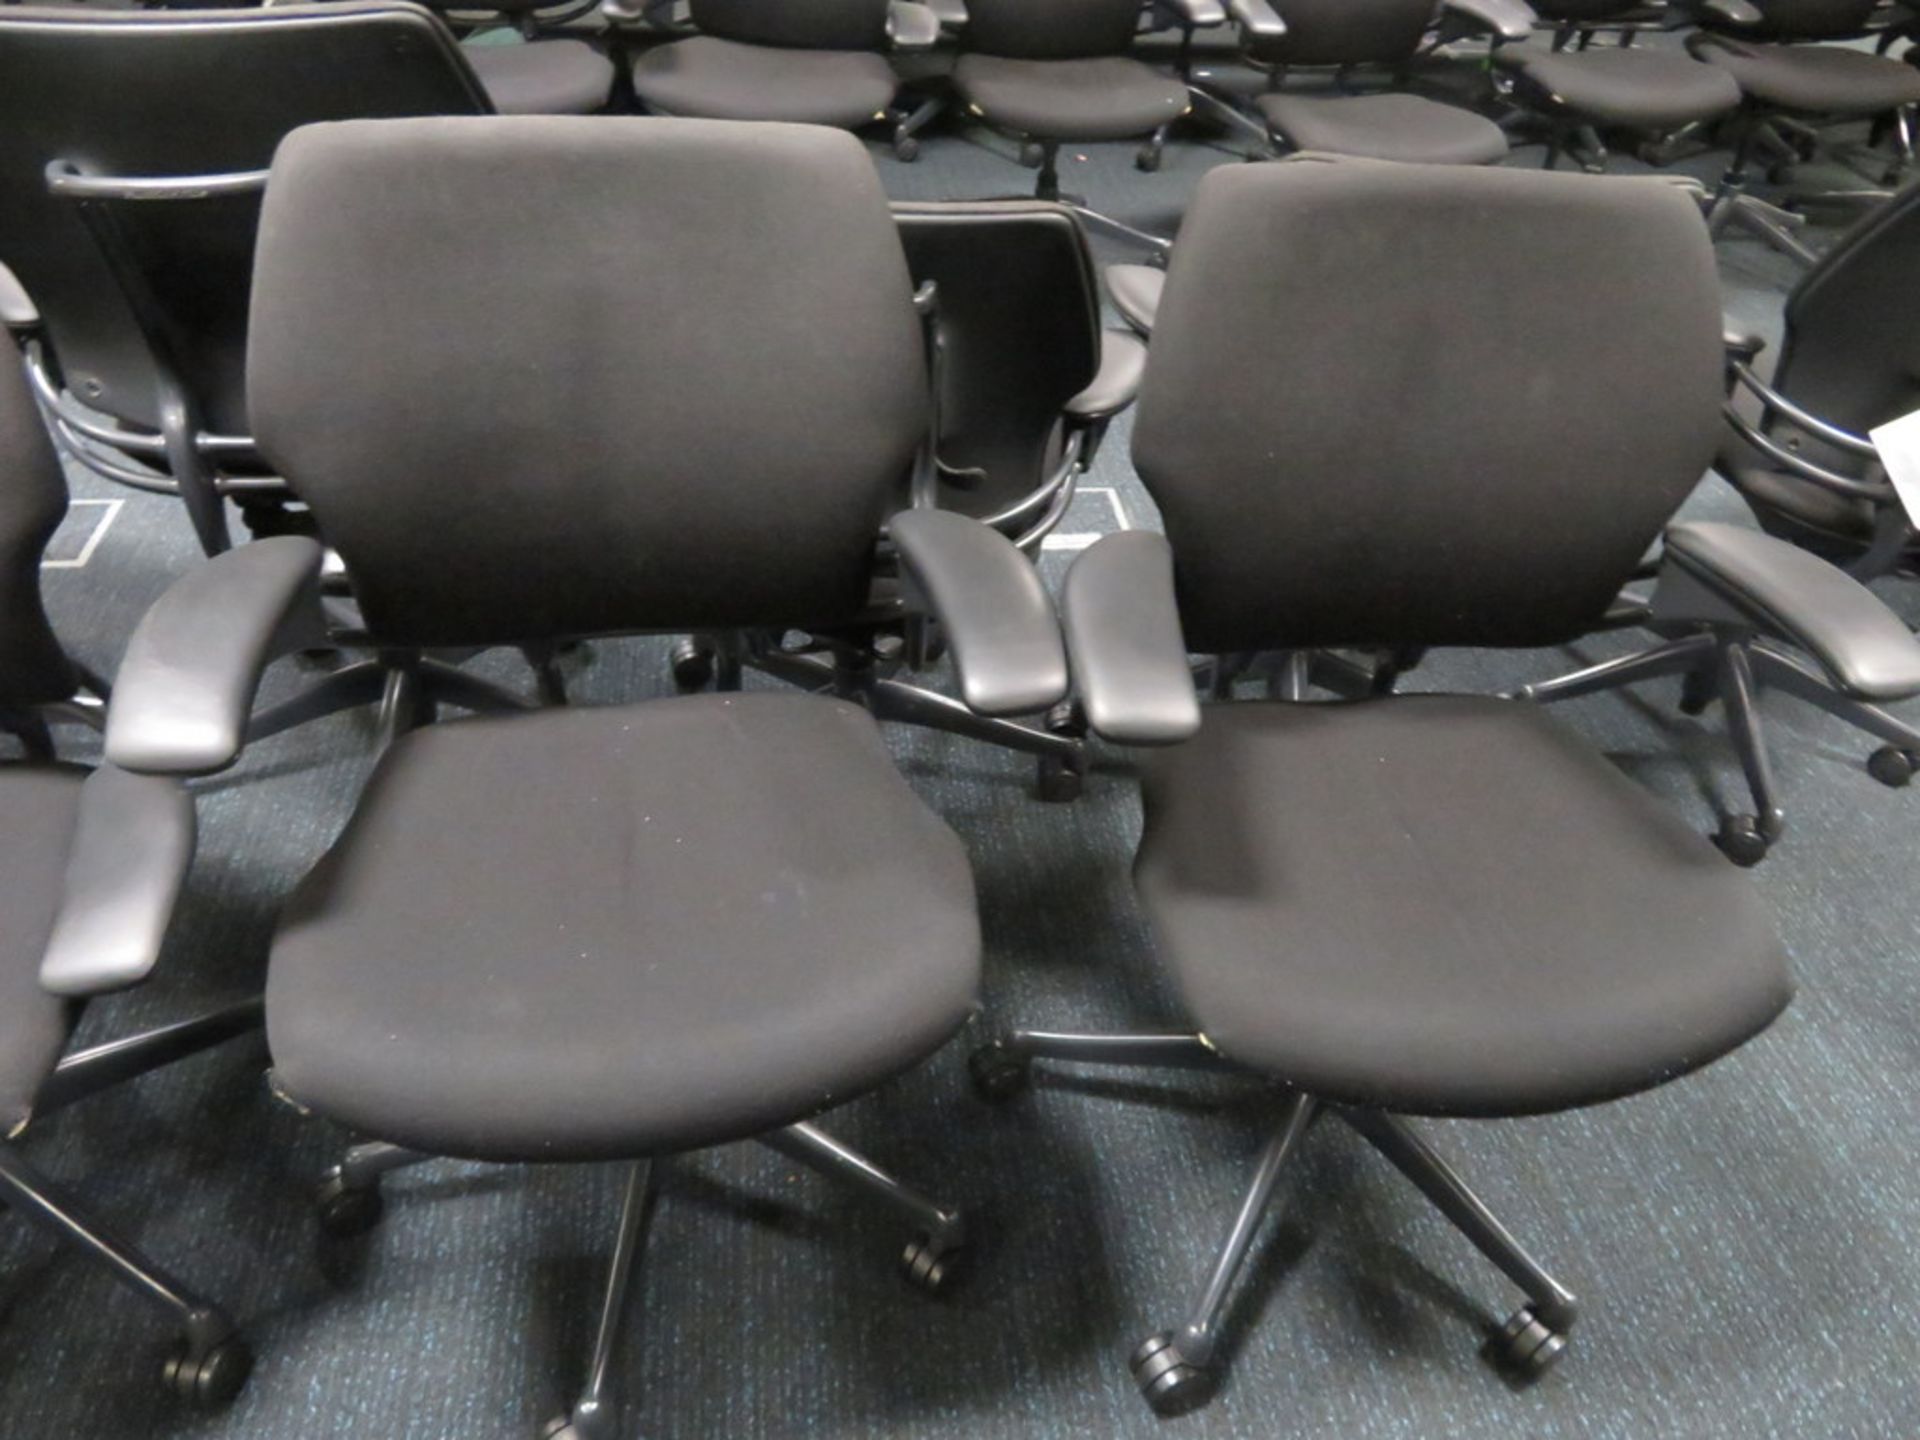 4x Humanscale Freedom Task Office Swivel Chairs. Varying Condition. - Image 3 of 5